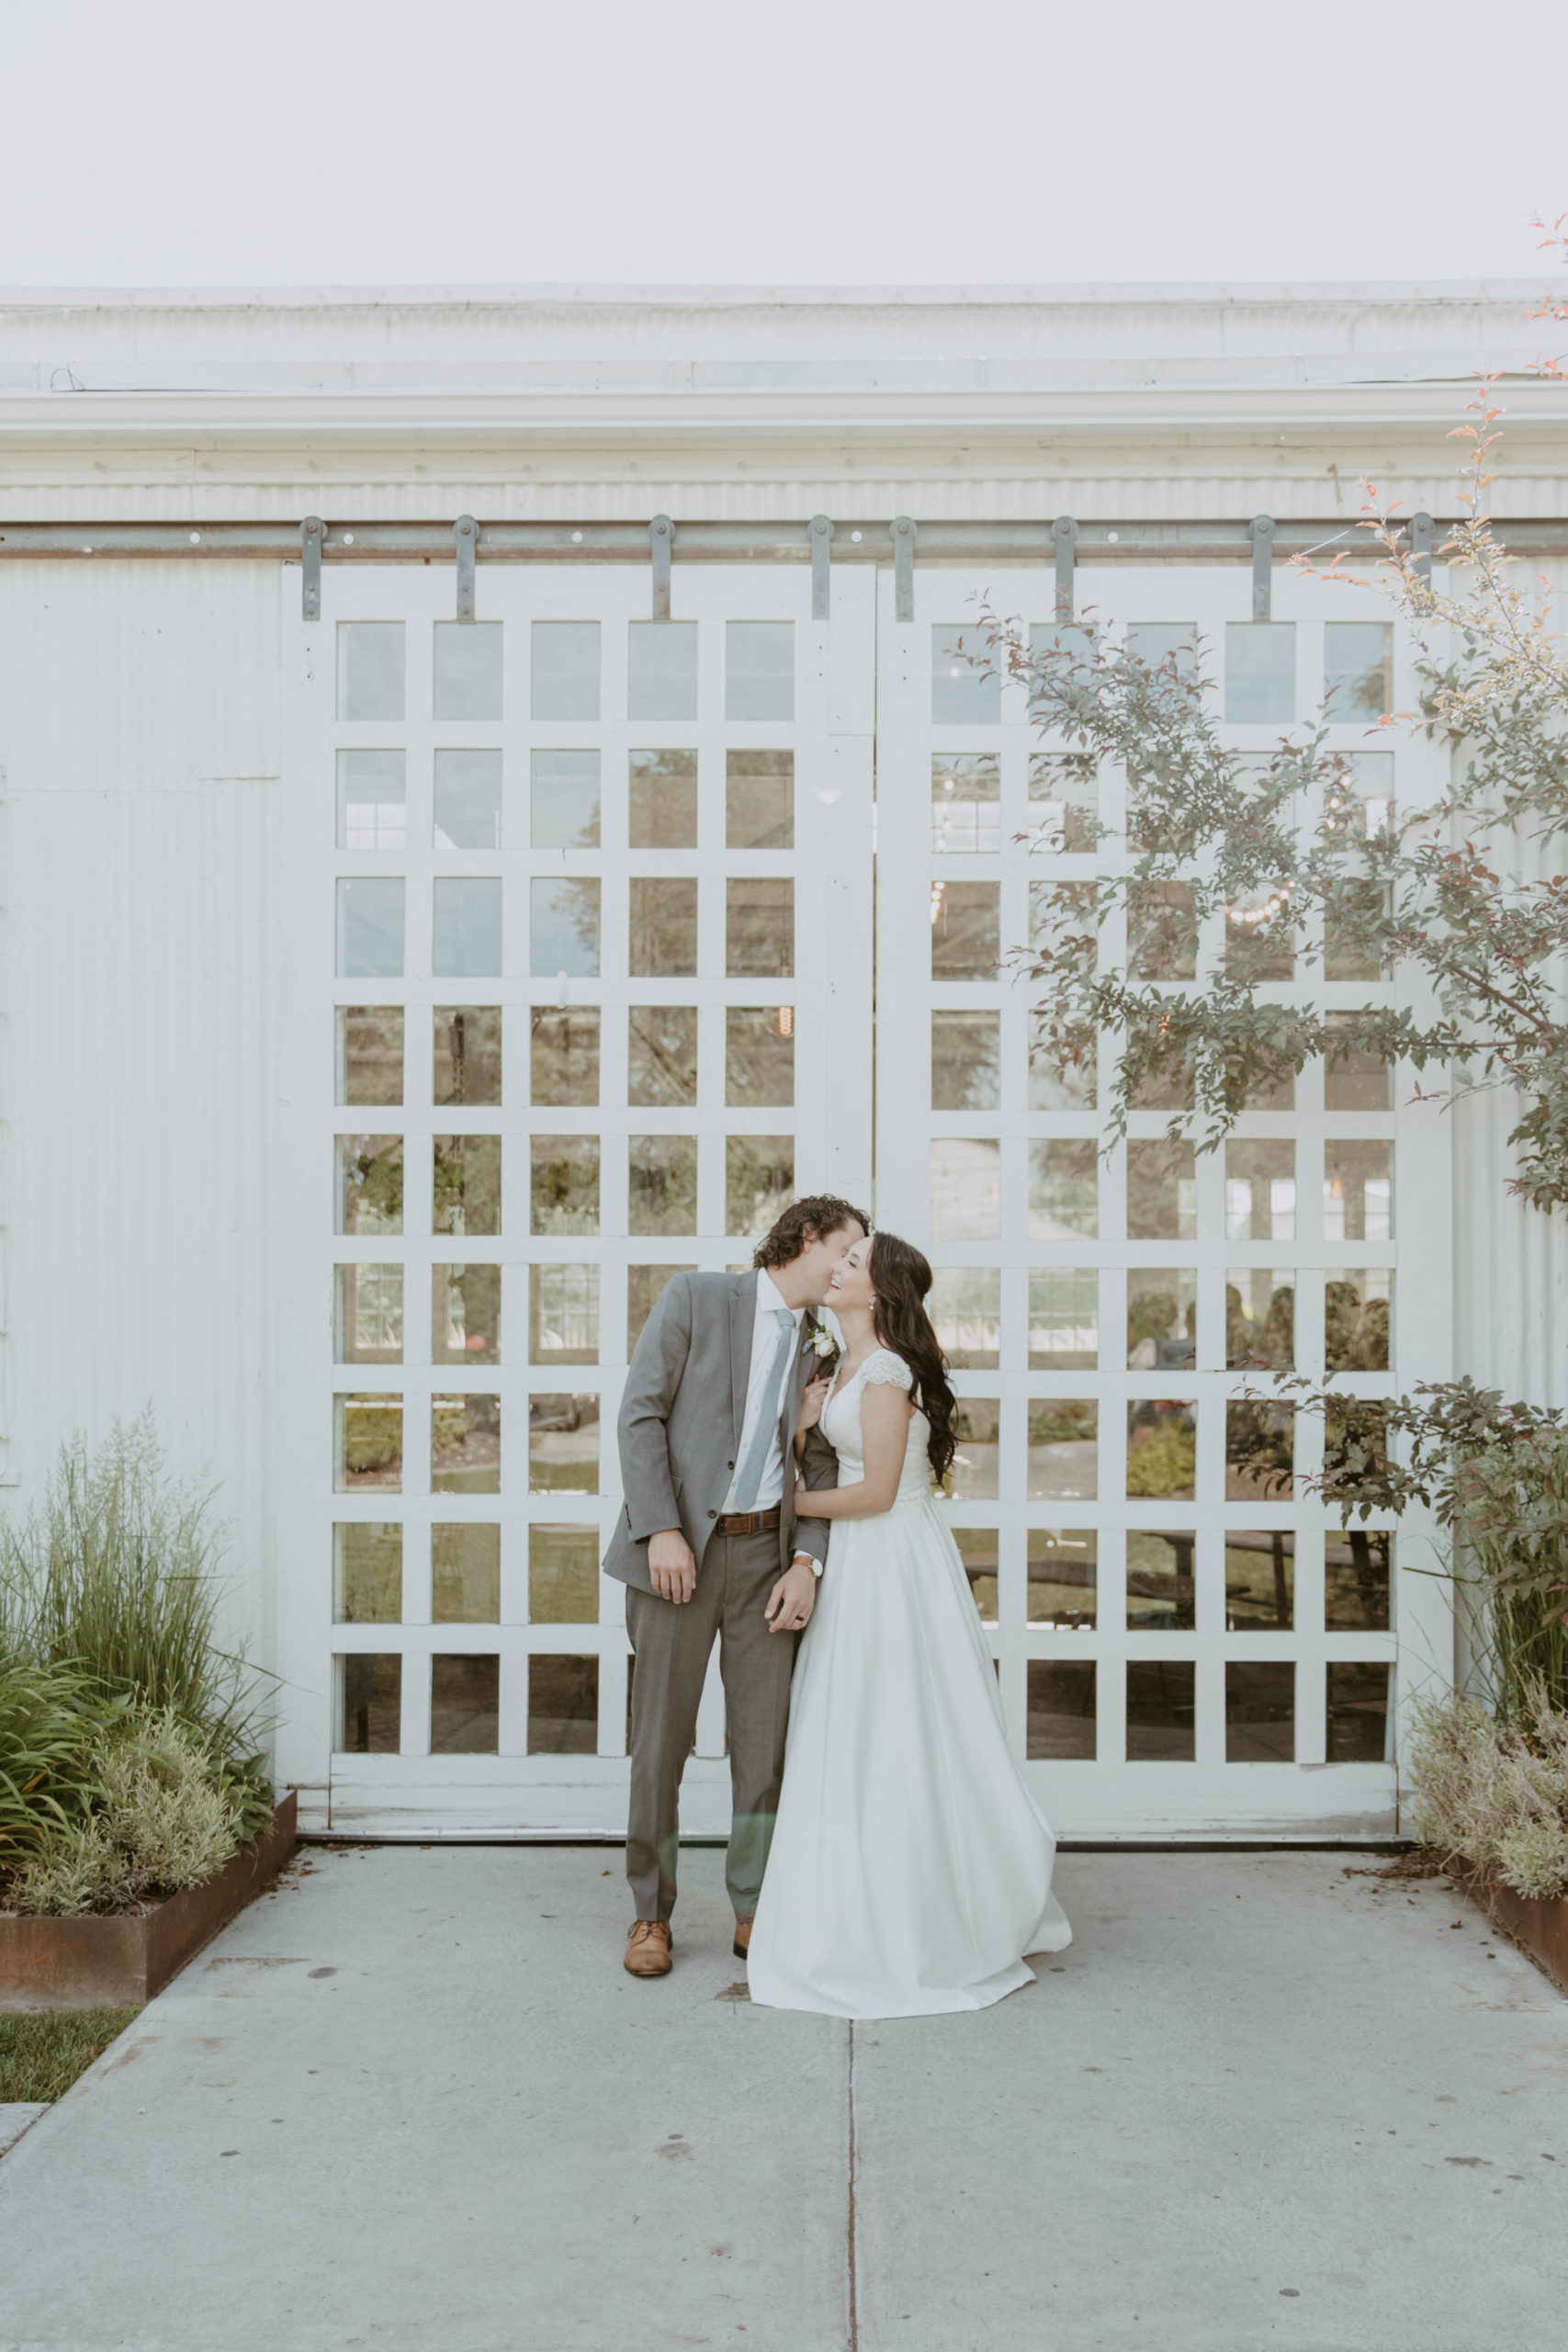 Bride and groom holding hands while kissing during bridal portraits outside the White Shanty venue in Provo, Utah with white barn doors in the background.